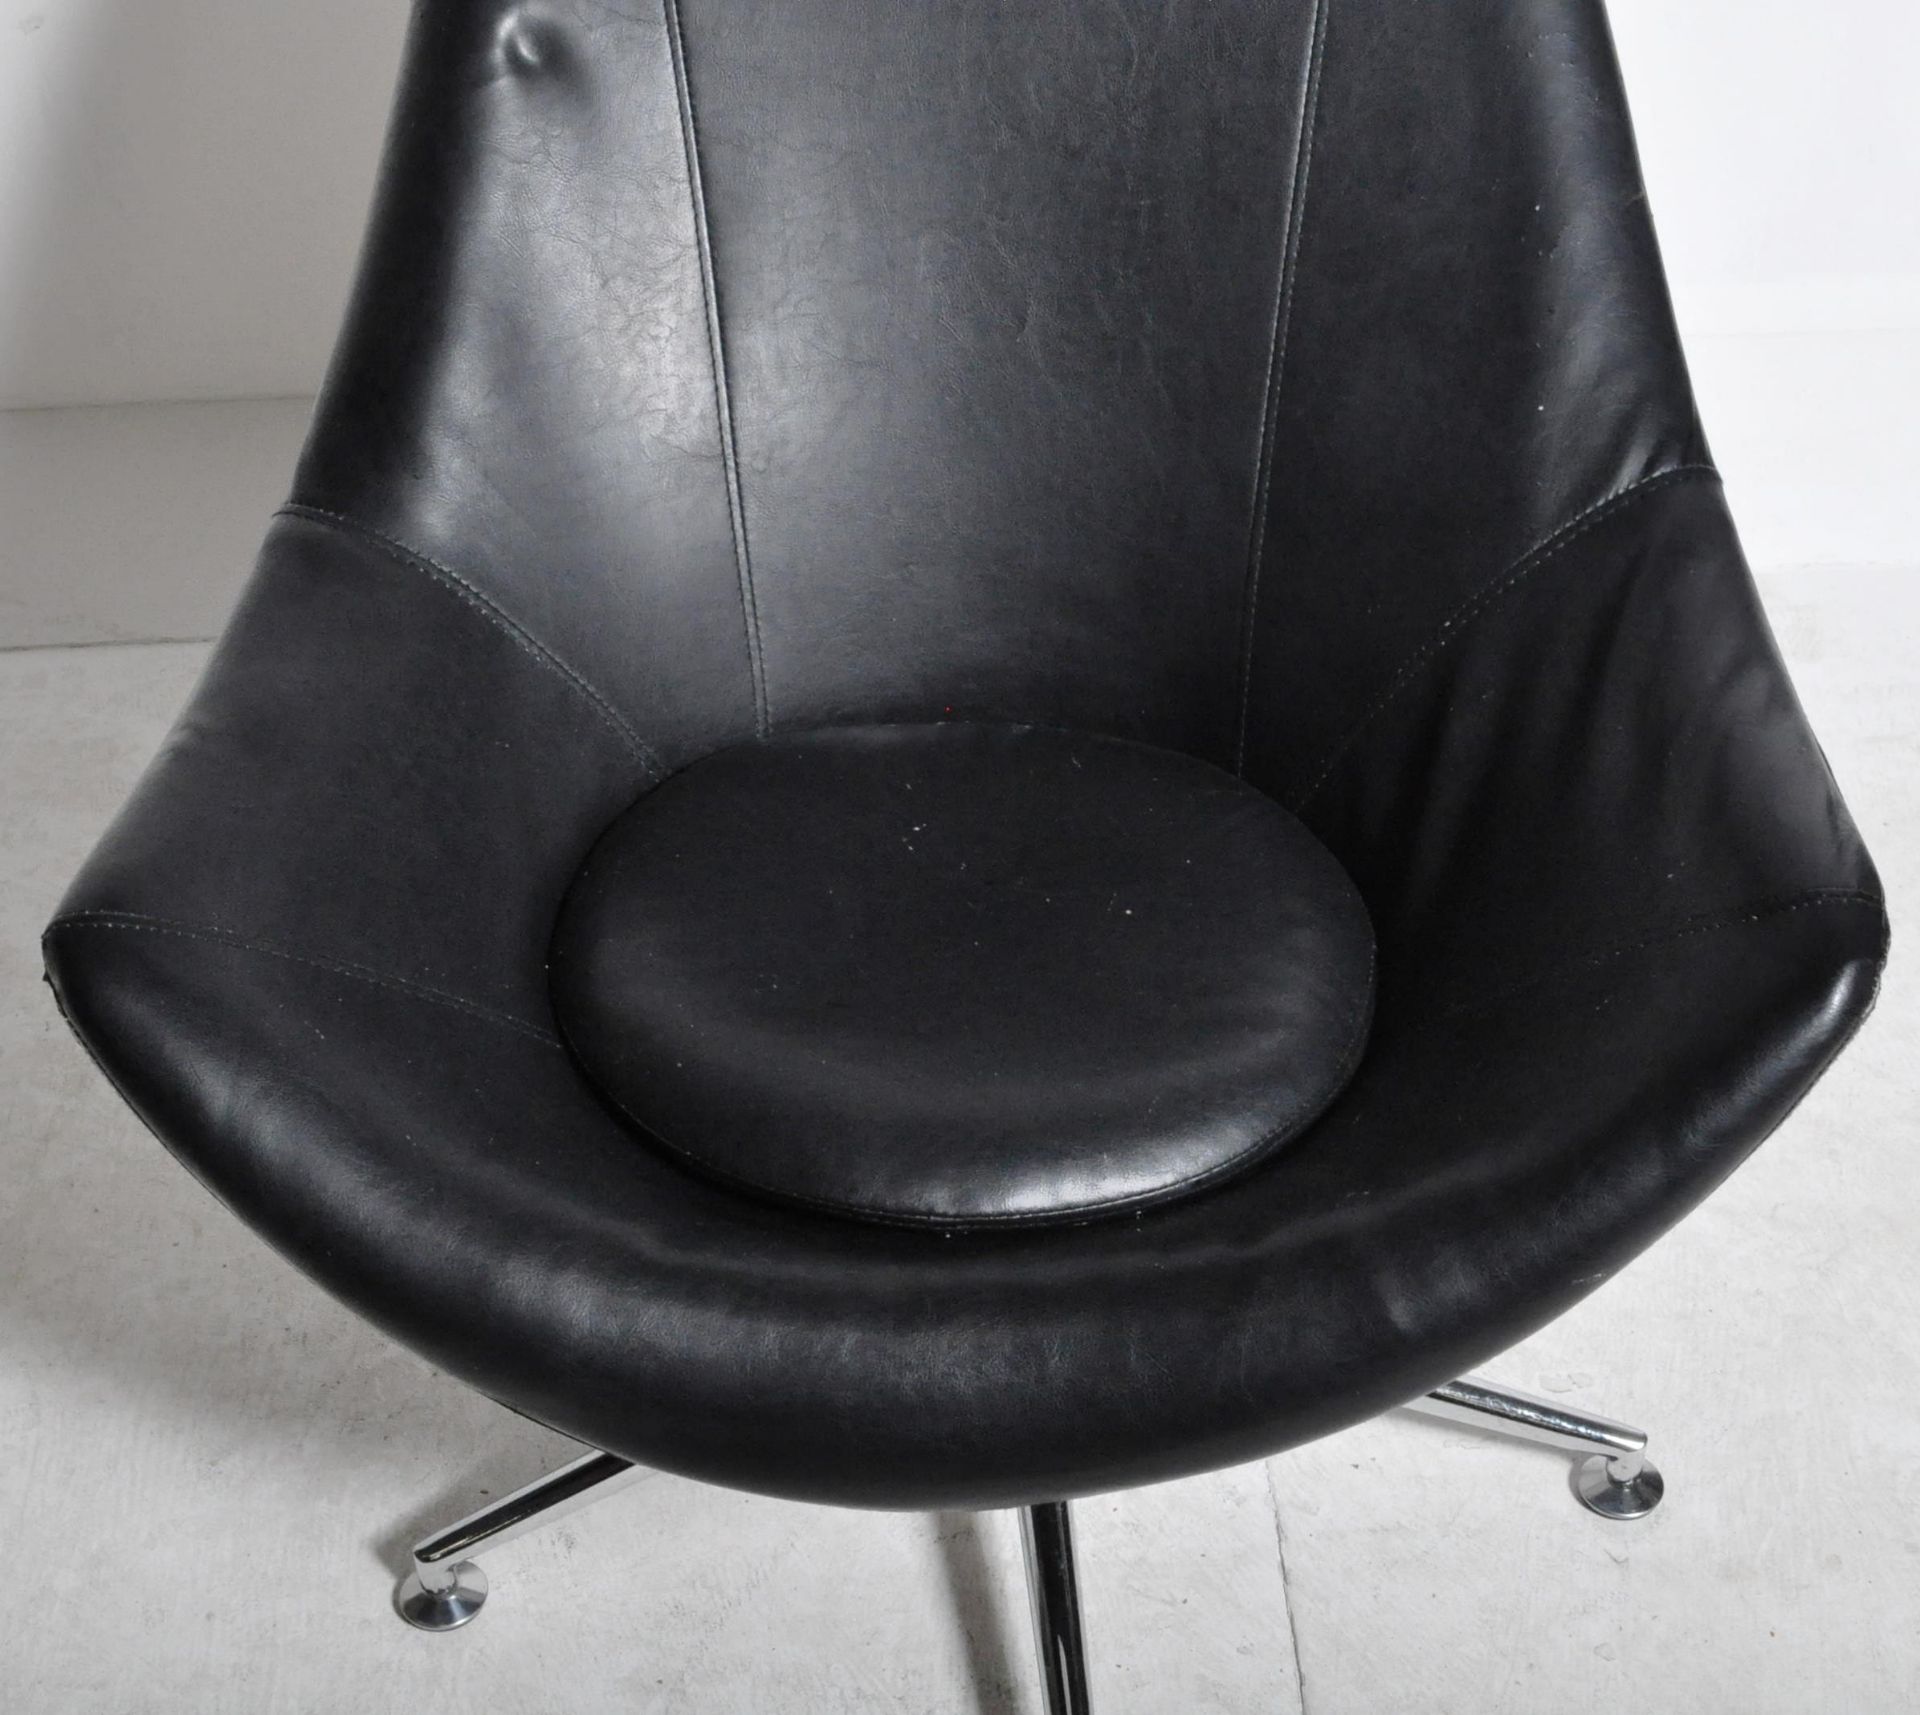 RETRO 1970'S BLACK LEATHER EGG CHAIR RAISED ON A CHROME BASE - Image 4 of 6